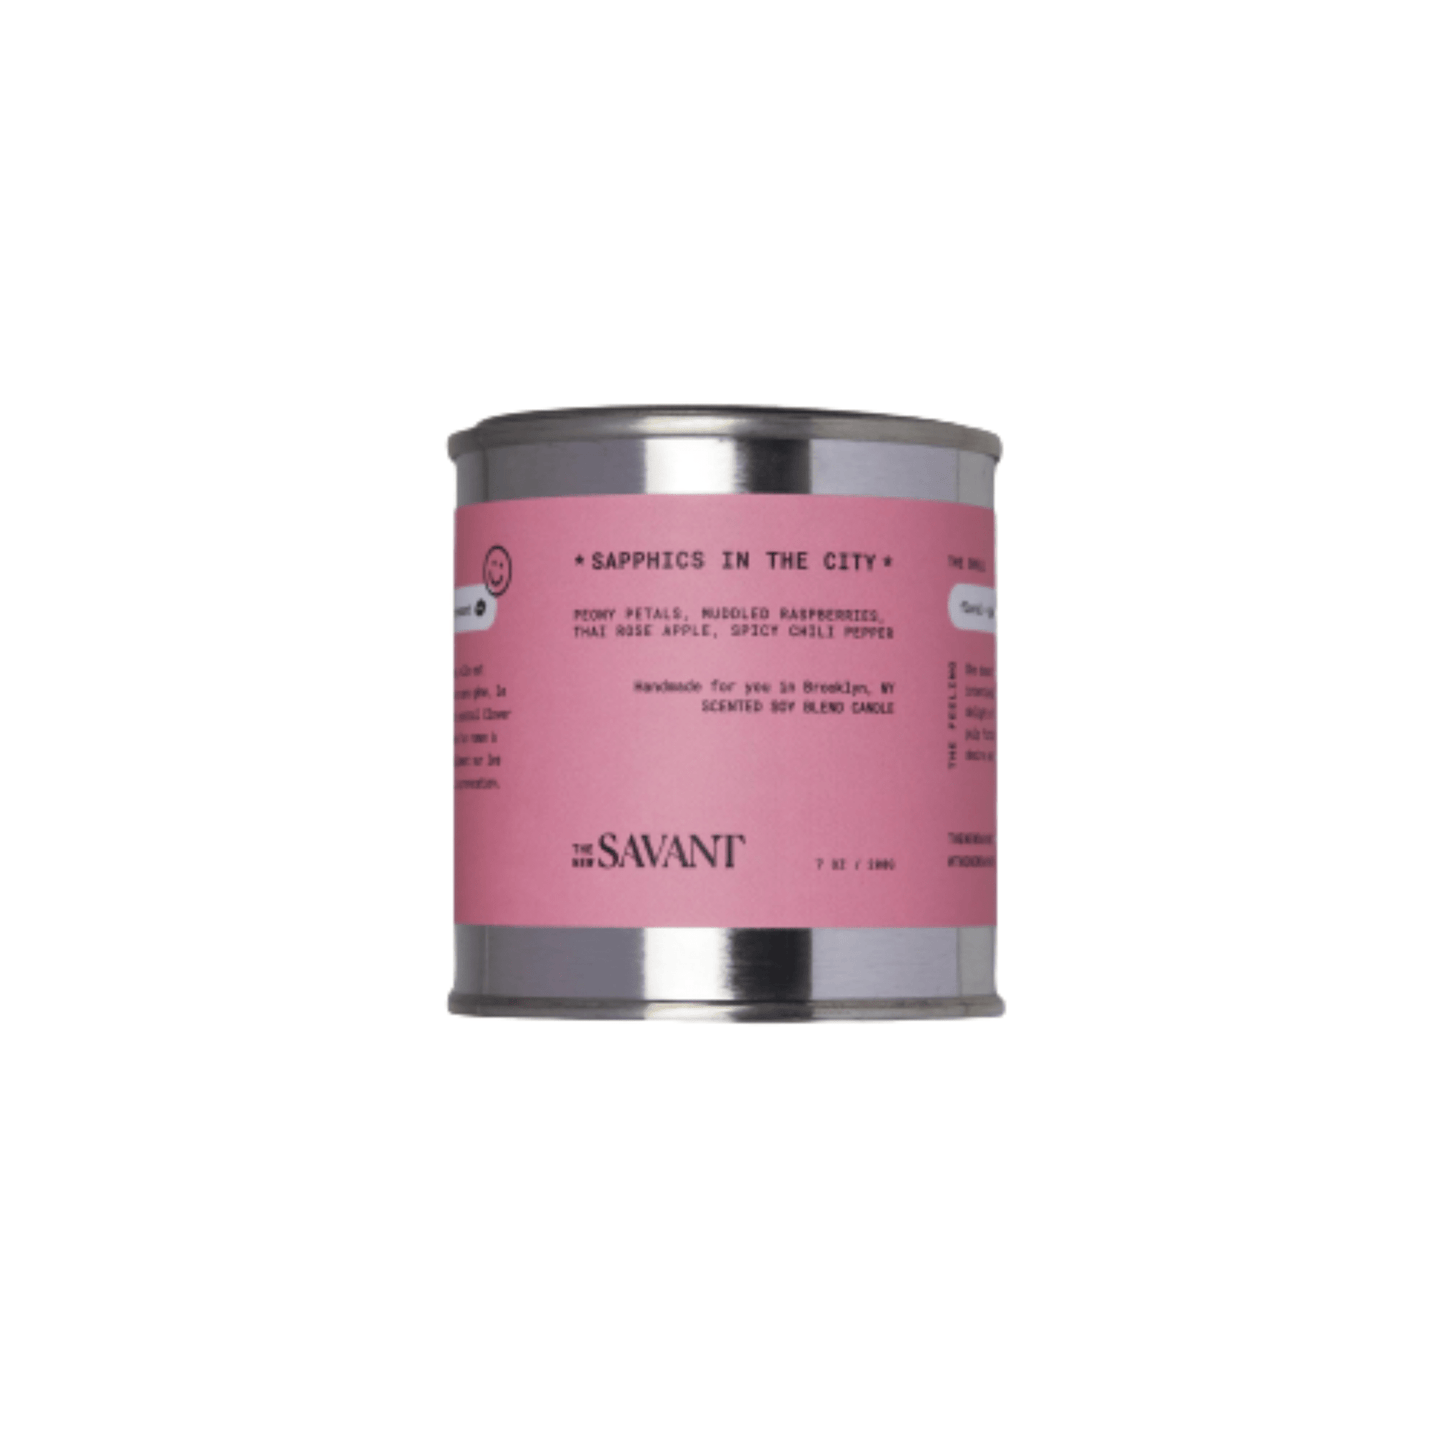 Primary Image of Sapphics in the City Candle